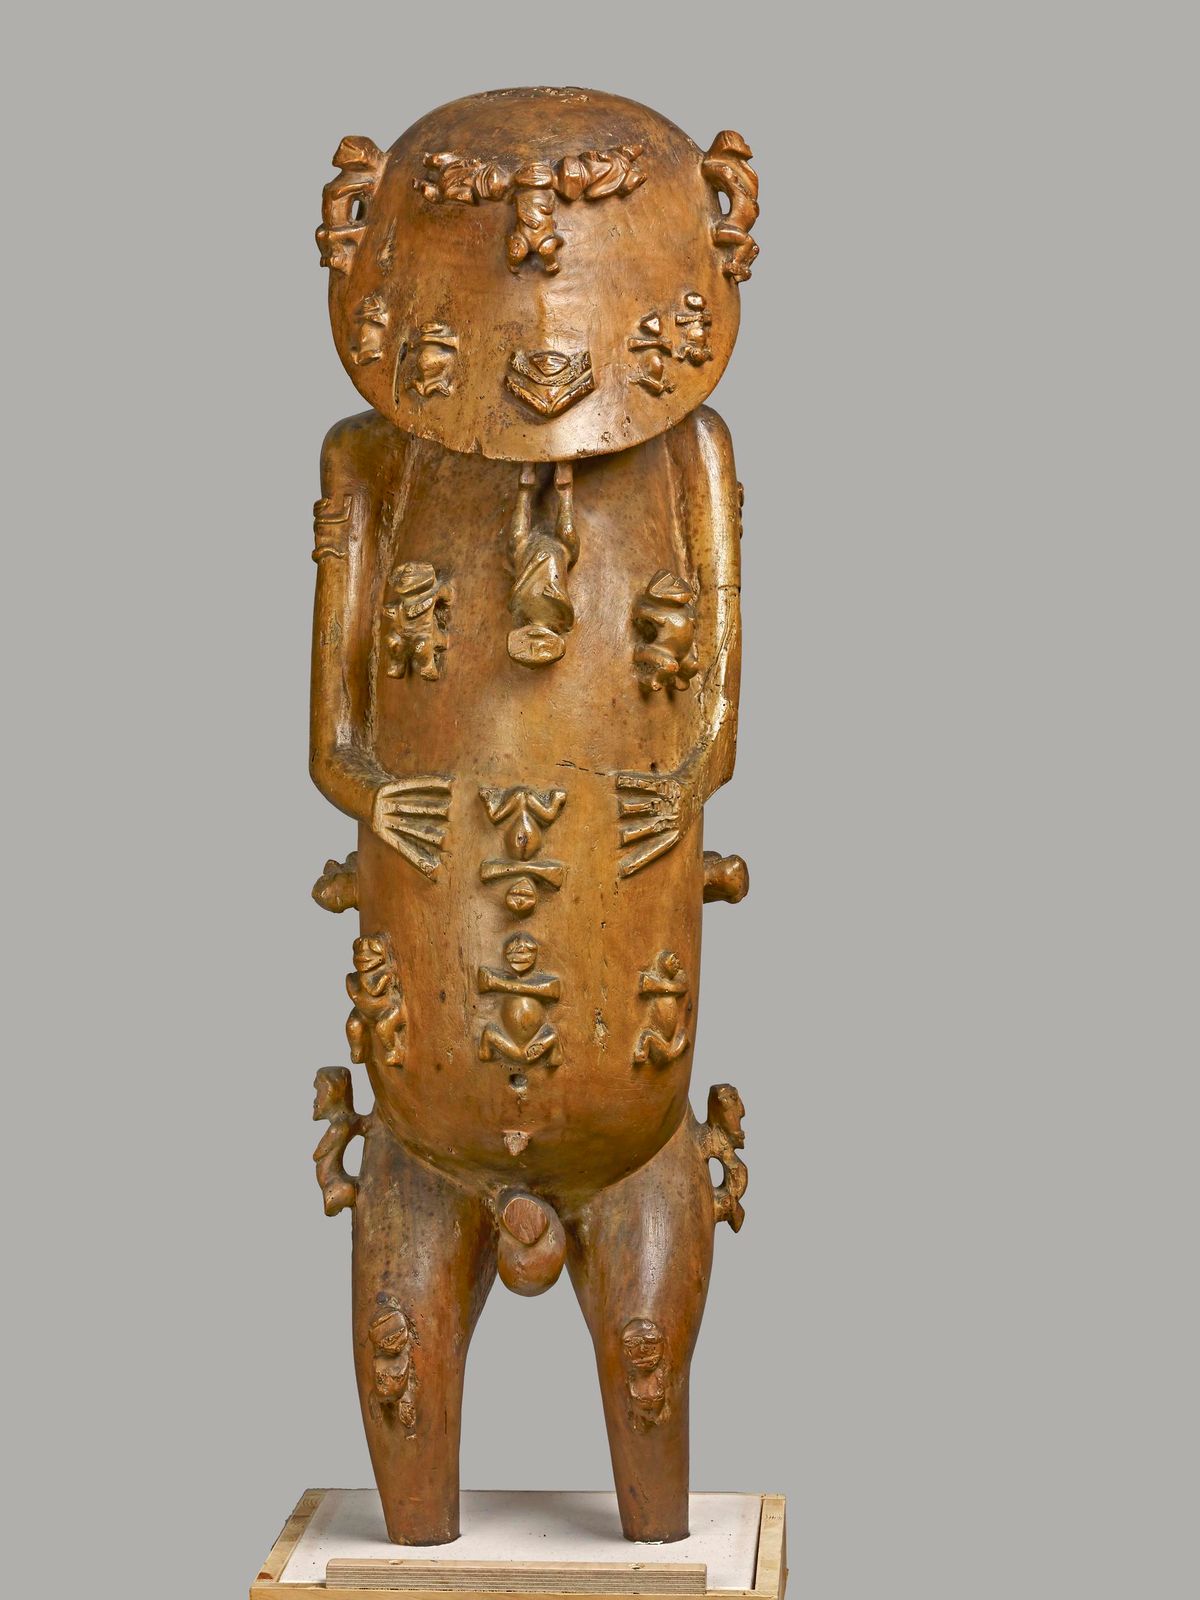 The Figure of A'a is “one of mankind’s greatest artistic creations", says Steven Hooper, a specialist in Pacific art at the University of East Anglia’s Sainsbury Centre © The Trustees of the British Museum 